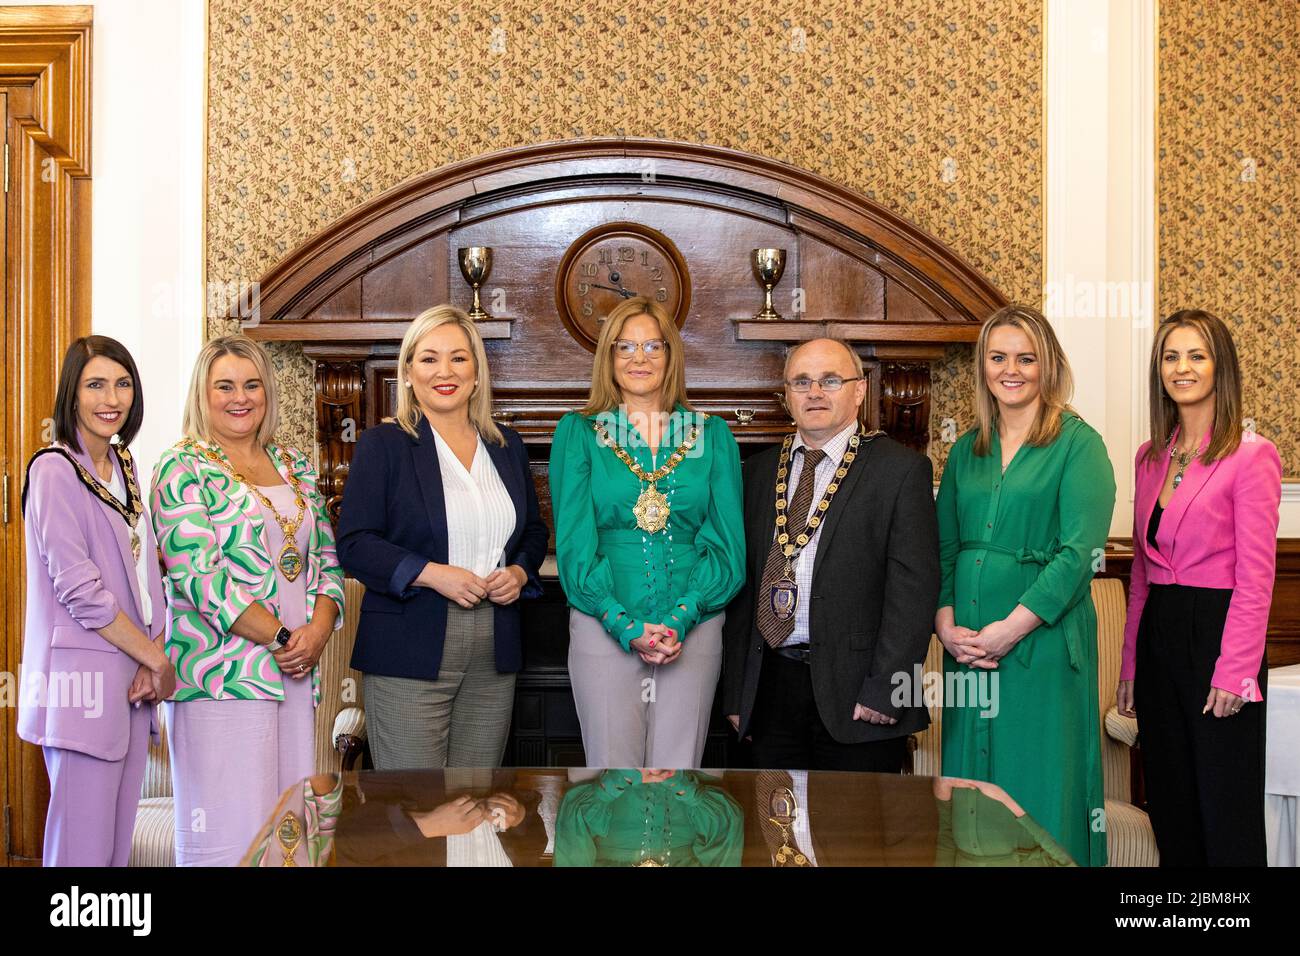 (Left-right) Chair of Mid Ulster District Council Sinn Fein Councillor Cora Groogan, Mayor of Derry City and Strabane District Council, Sinn Fein Councillor Sandra Duffy, Sinn Fein Vice President Michelle O'Neill MLA, Lord Mayor of Belfast Sinn Fein Councillor Christina Black, Chairperson of Fermanagh & Omagh District Council Sinn Fein Councillor Barry McElduff, Vice-Chair of Causeway Coast and Glens Borough Council Sinn Fein Councillor Kathleen McGurk, Vice Chair of Newry, Mourne and Down District Council Sinn Fein Councillor Aoife Finnegan during an invitation to the Lord Mayor's Parlour at  Stock Photo